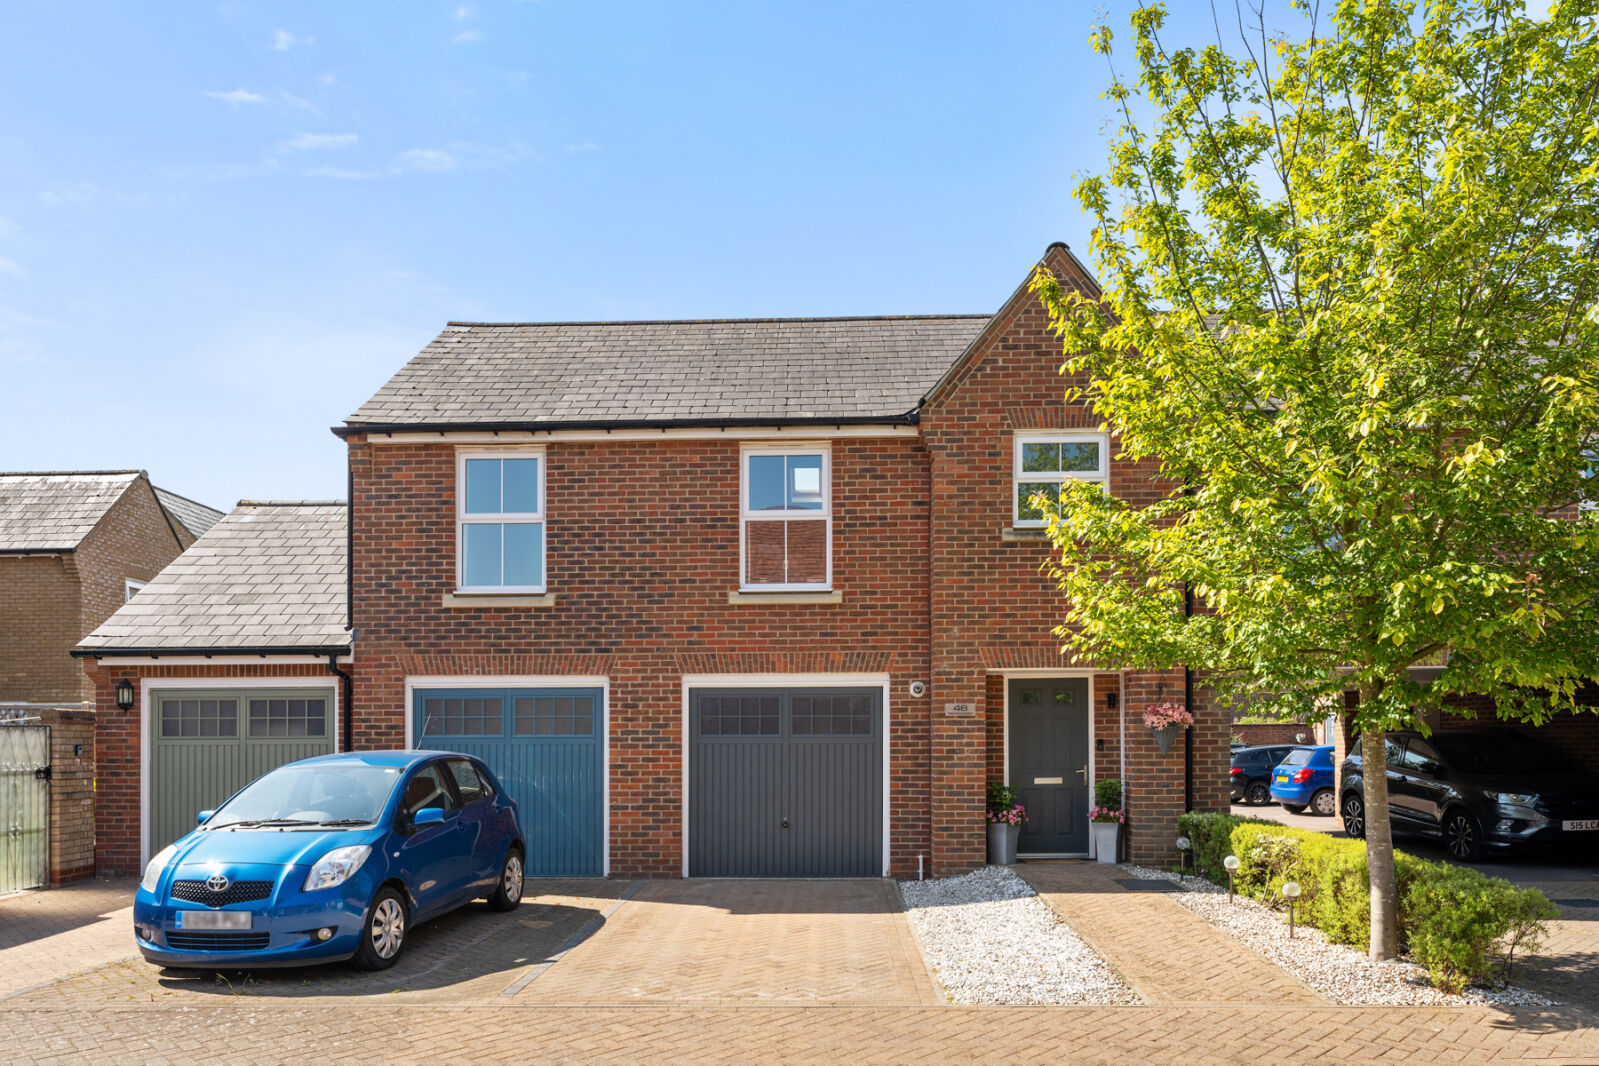 2 bedroom  house for sale Felstead Crescent, Stansted, CM24, main image